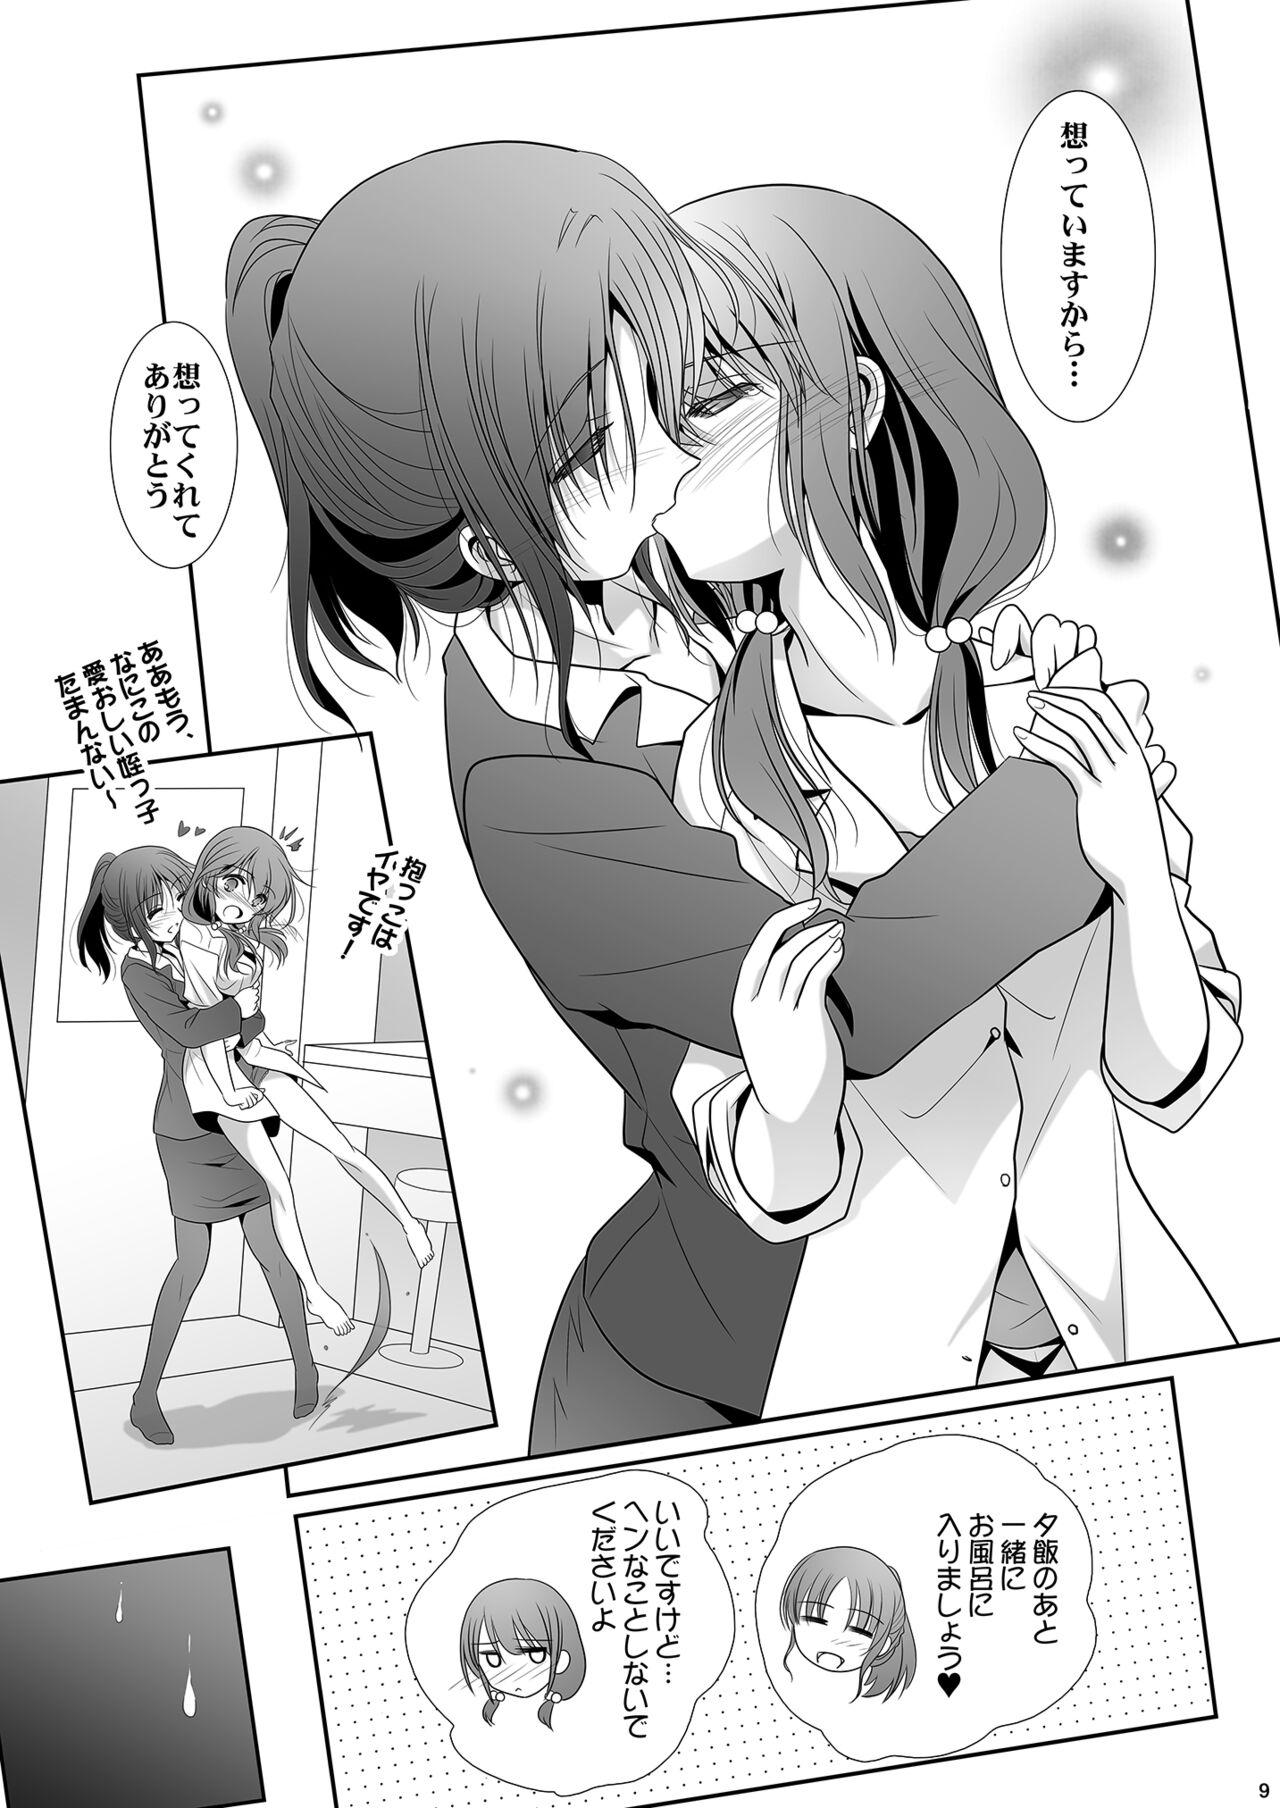 Mask Toshi no Thirteen - Age Difference is 13 Years - Original Real Amateurs - Page 9